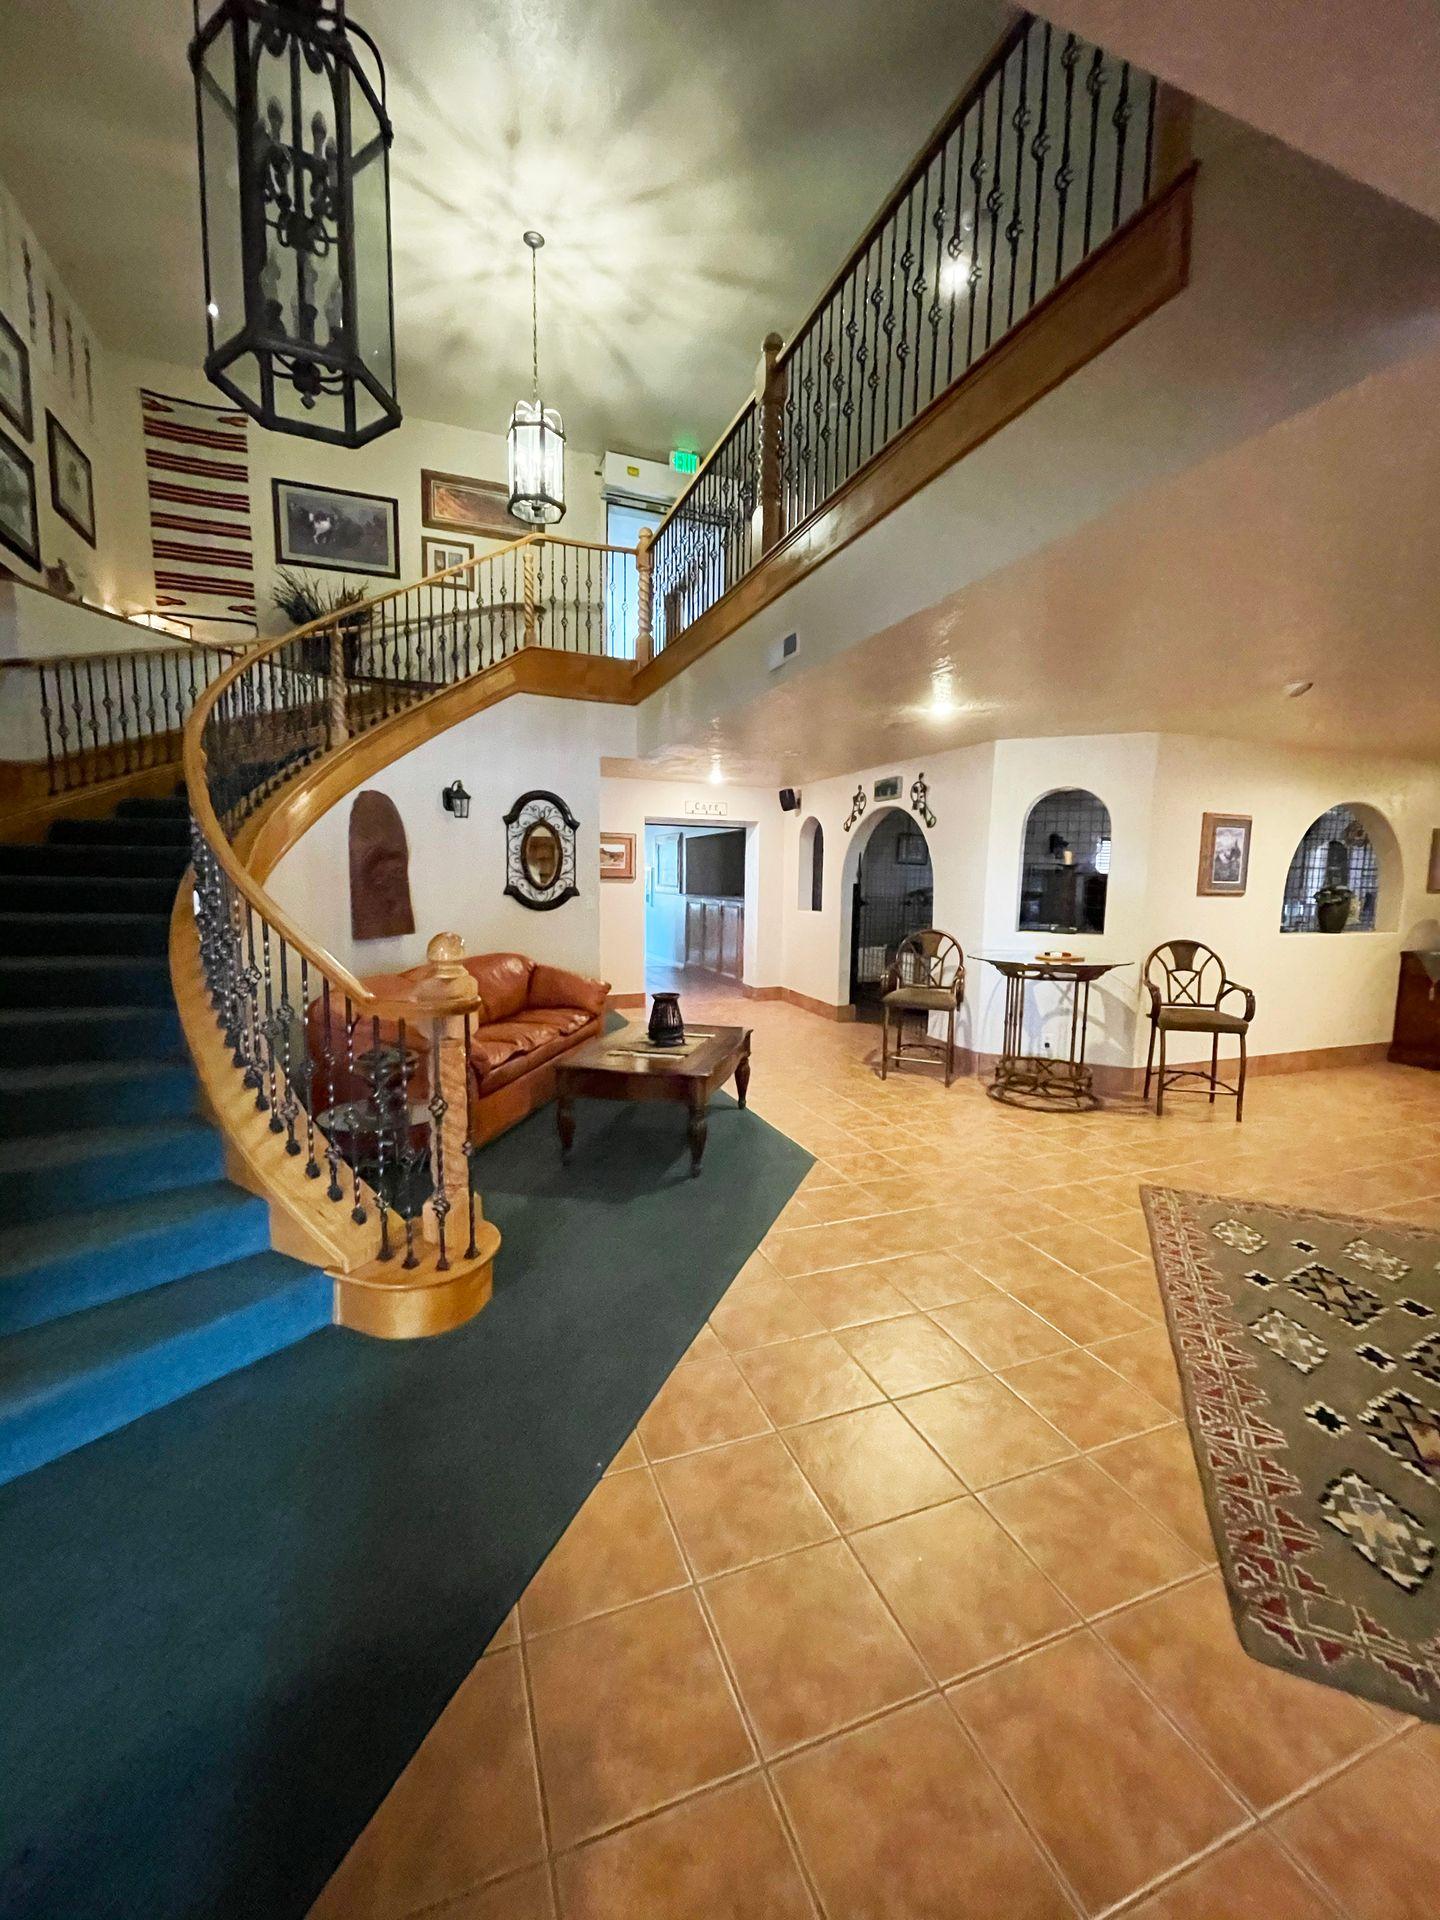 The lobby of the Snuggle Inn. There is a curved staircase, artwork on the walls, a rug and a couch, making the lobby feel welcoming.